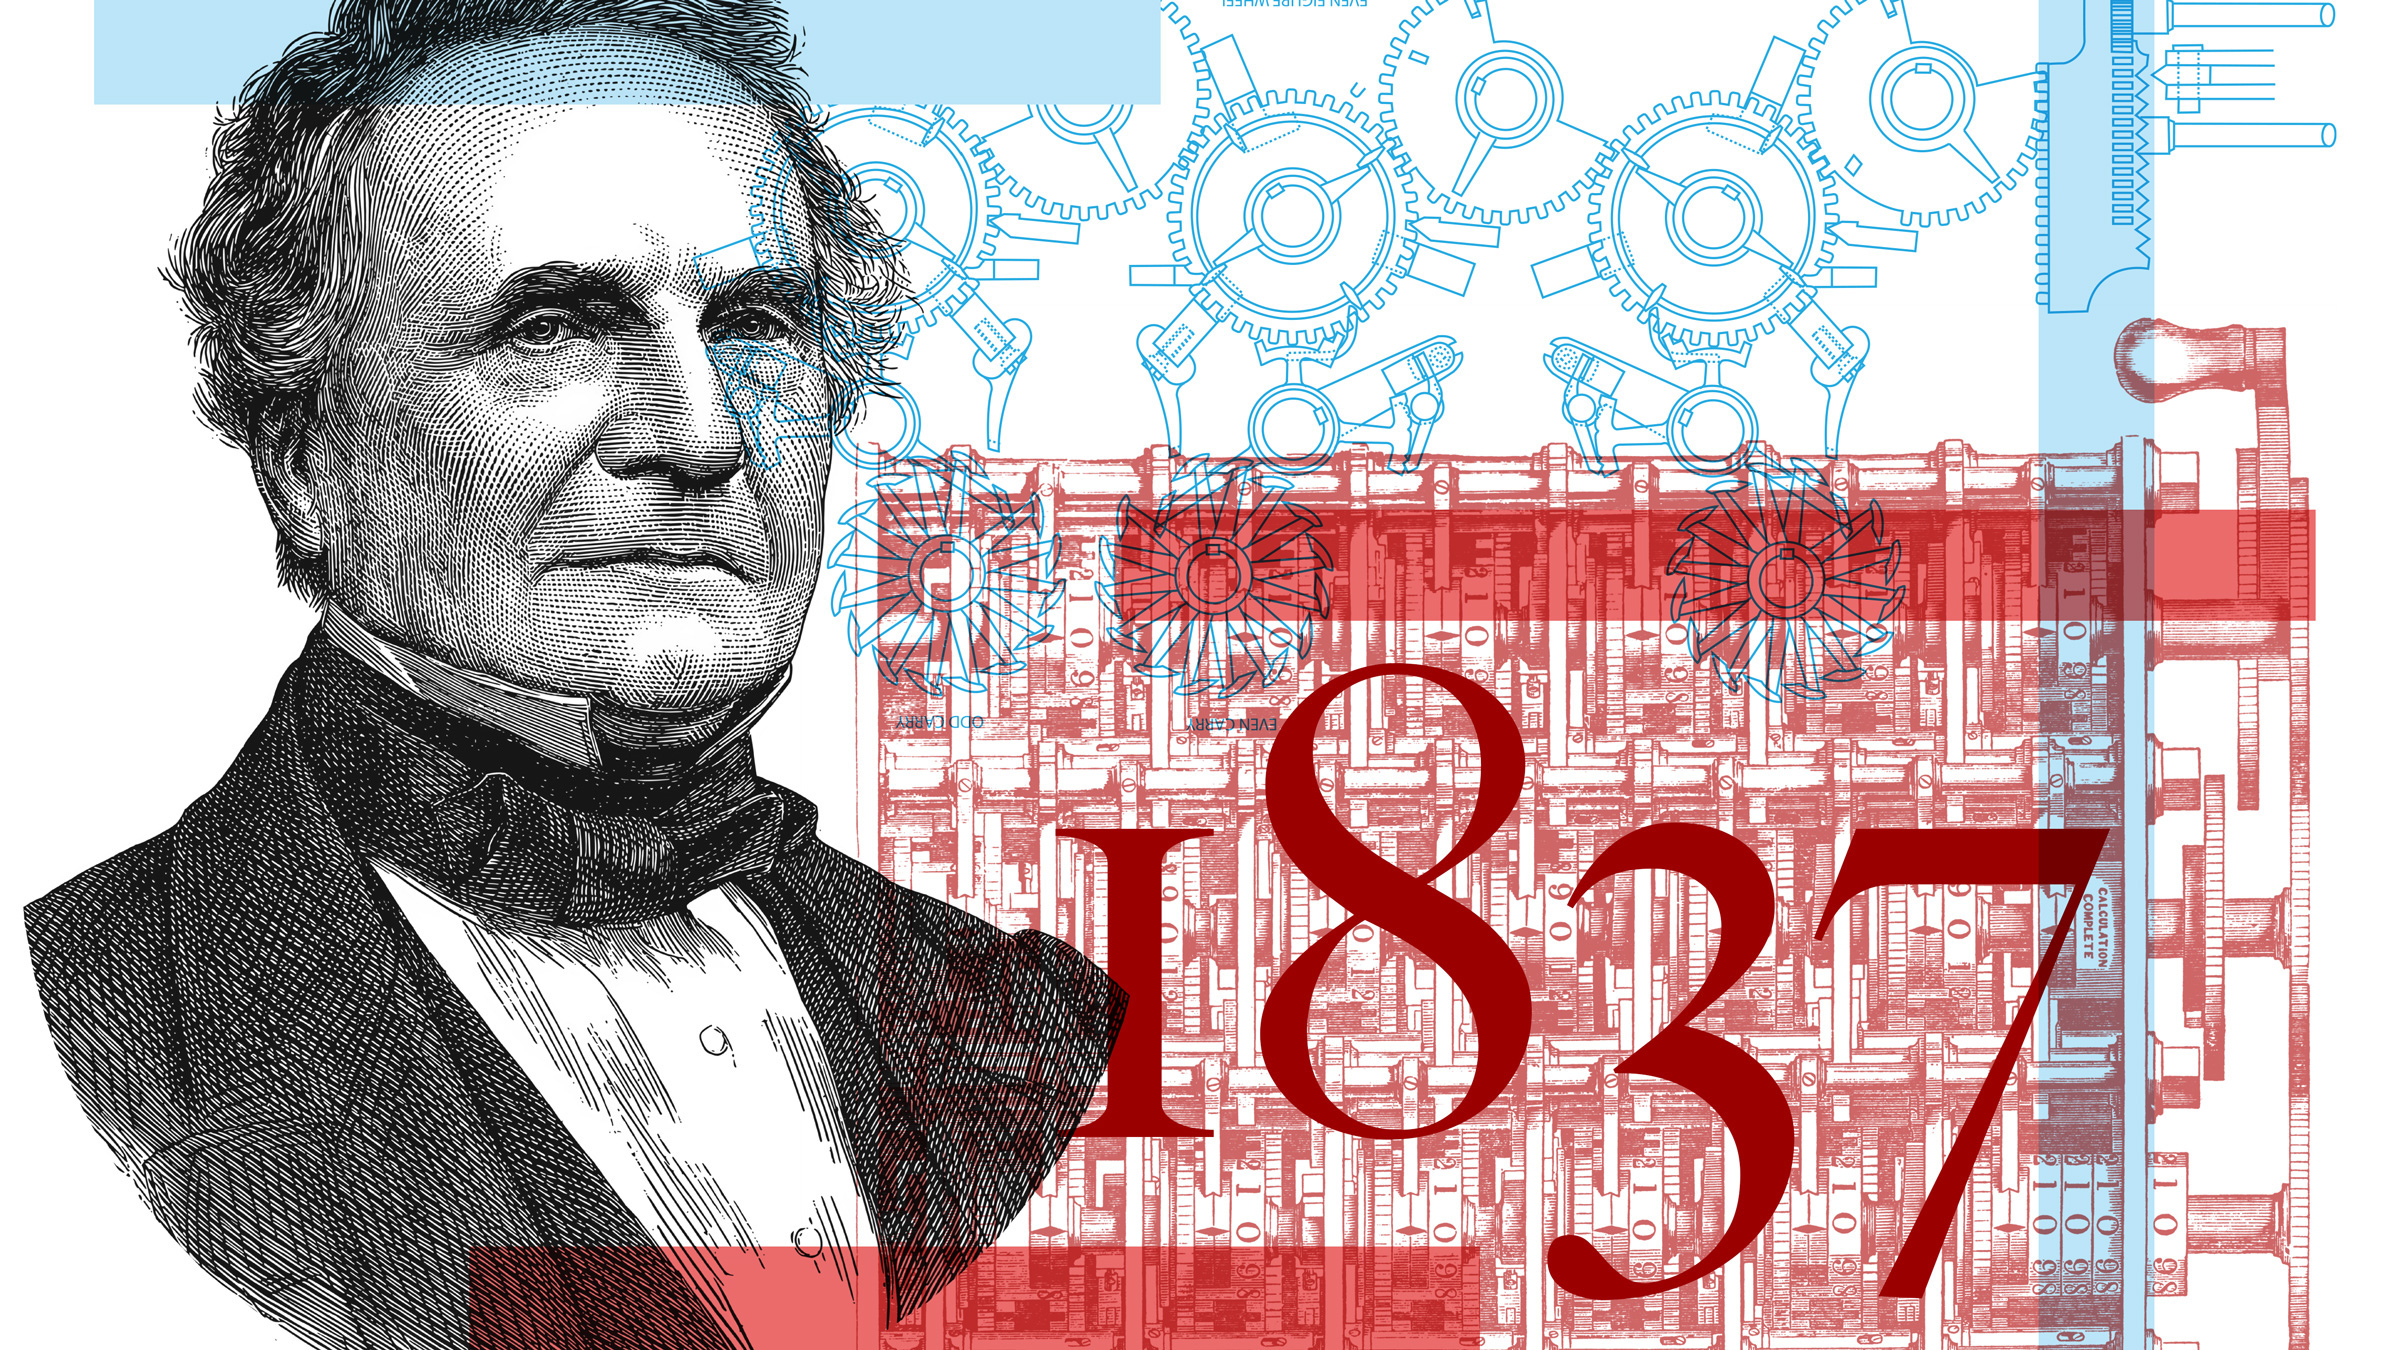 Credit: Andrij Borys Associates, Shutterstock Charles Babbage, gears, sketch of the Analytical Engine, and the date 1837, illustration